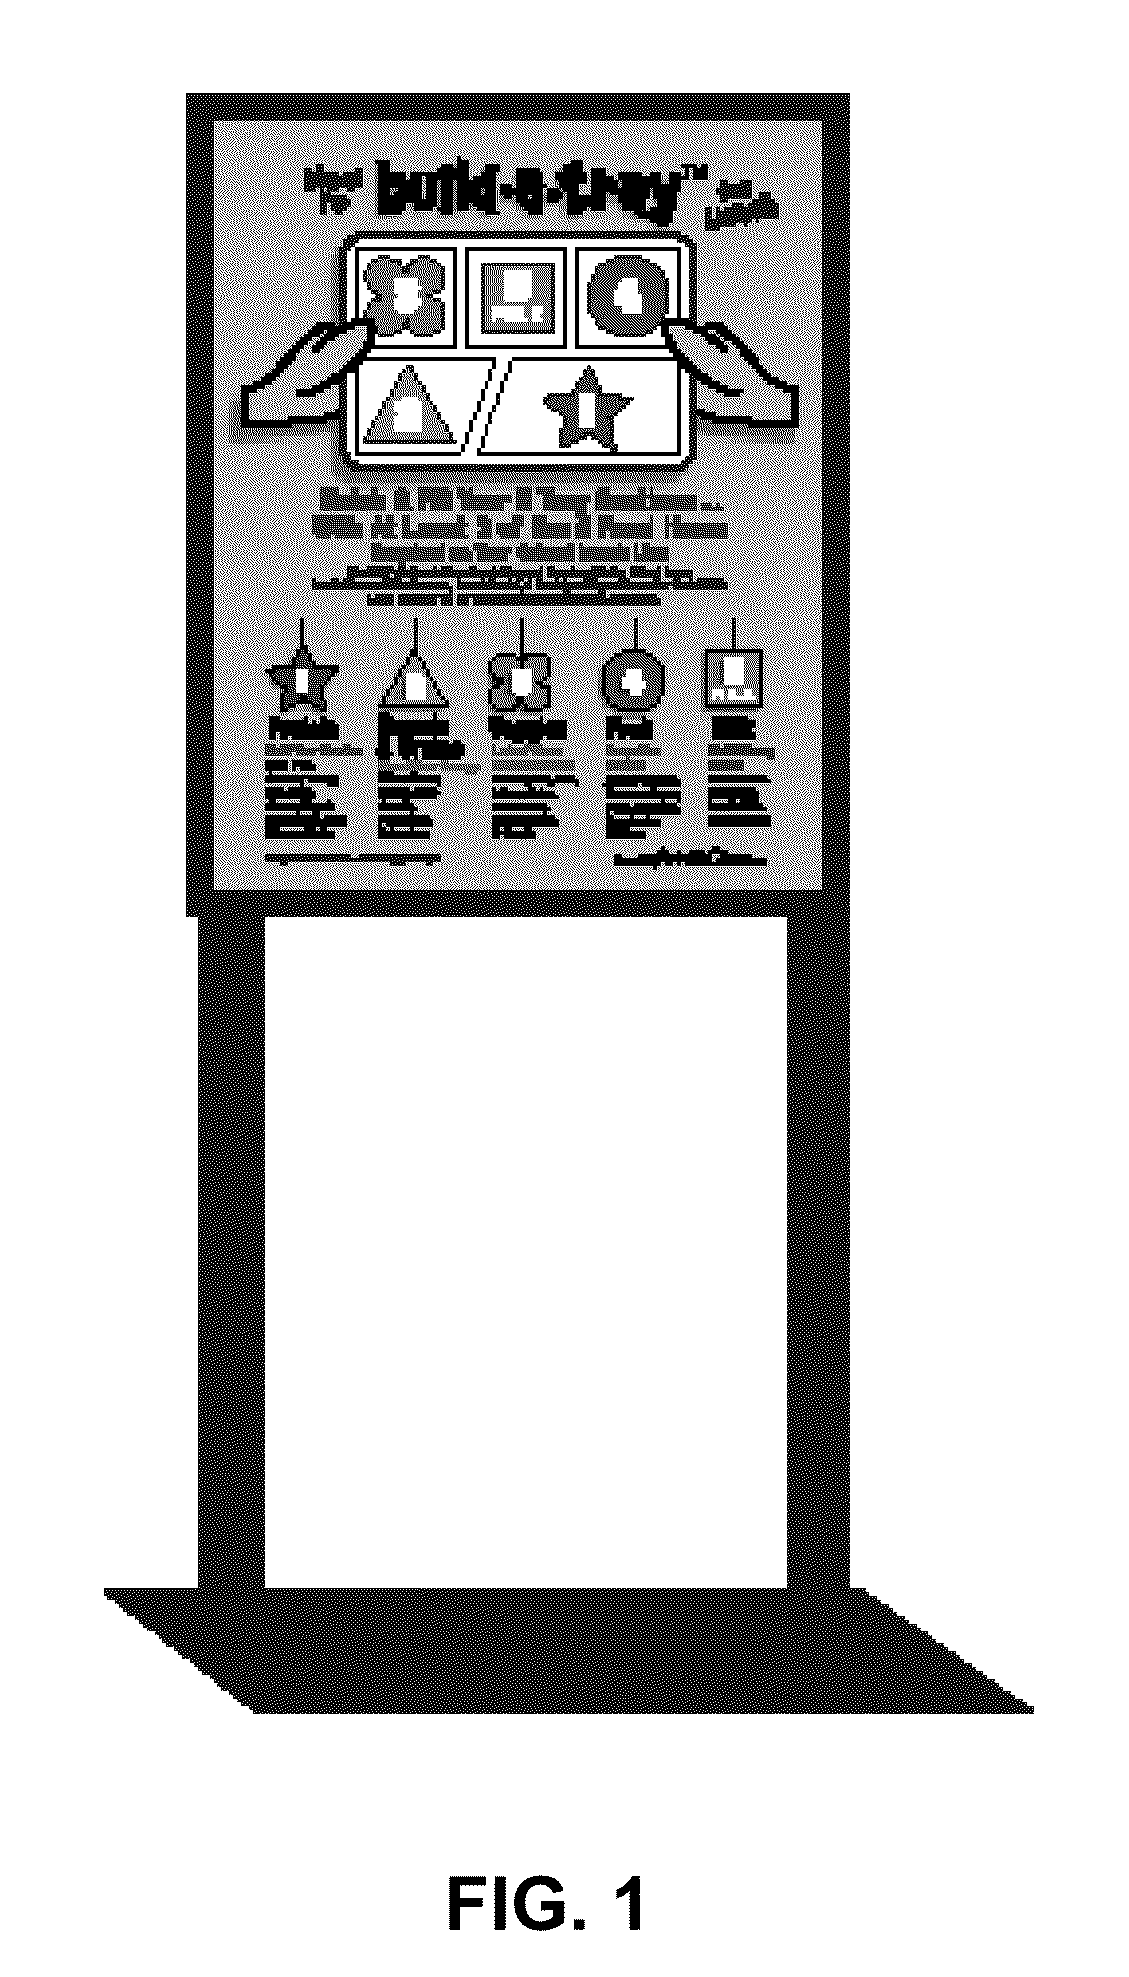 Method and apparatus for guiding a child in the self-selection of a nutritionally-balanced meal in order to increase the likelihood that the child will consume a nutritionally-balanced meal